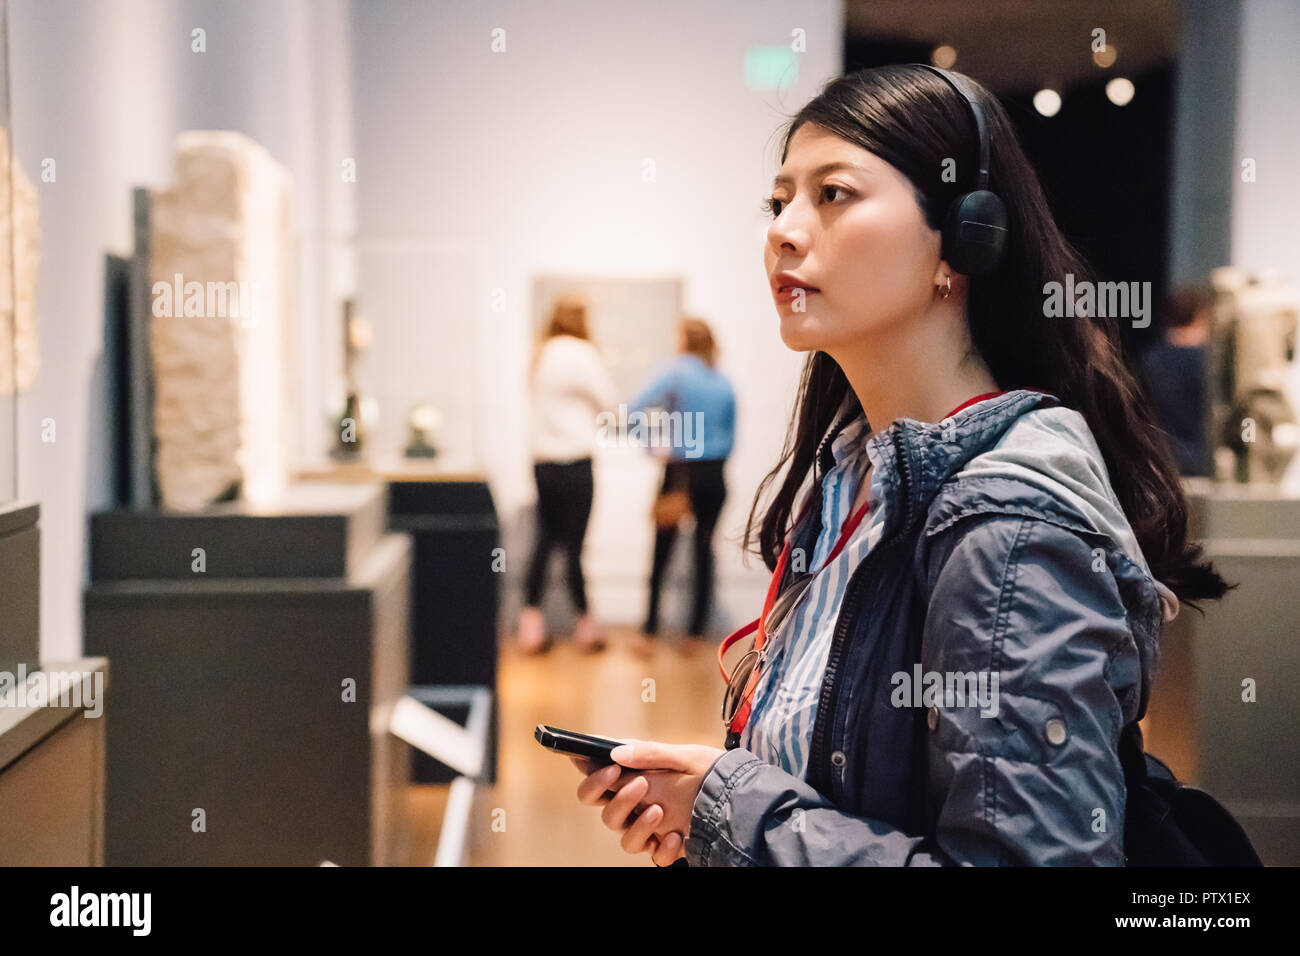 an elegant lady in the exhibition, wearing earphone to hear the voice guide Stock Photo